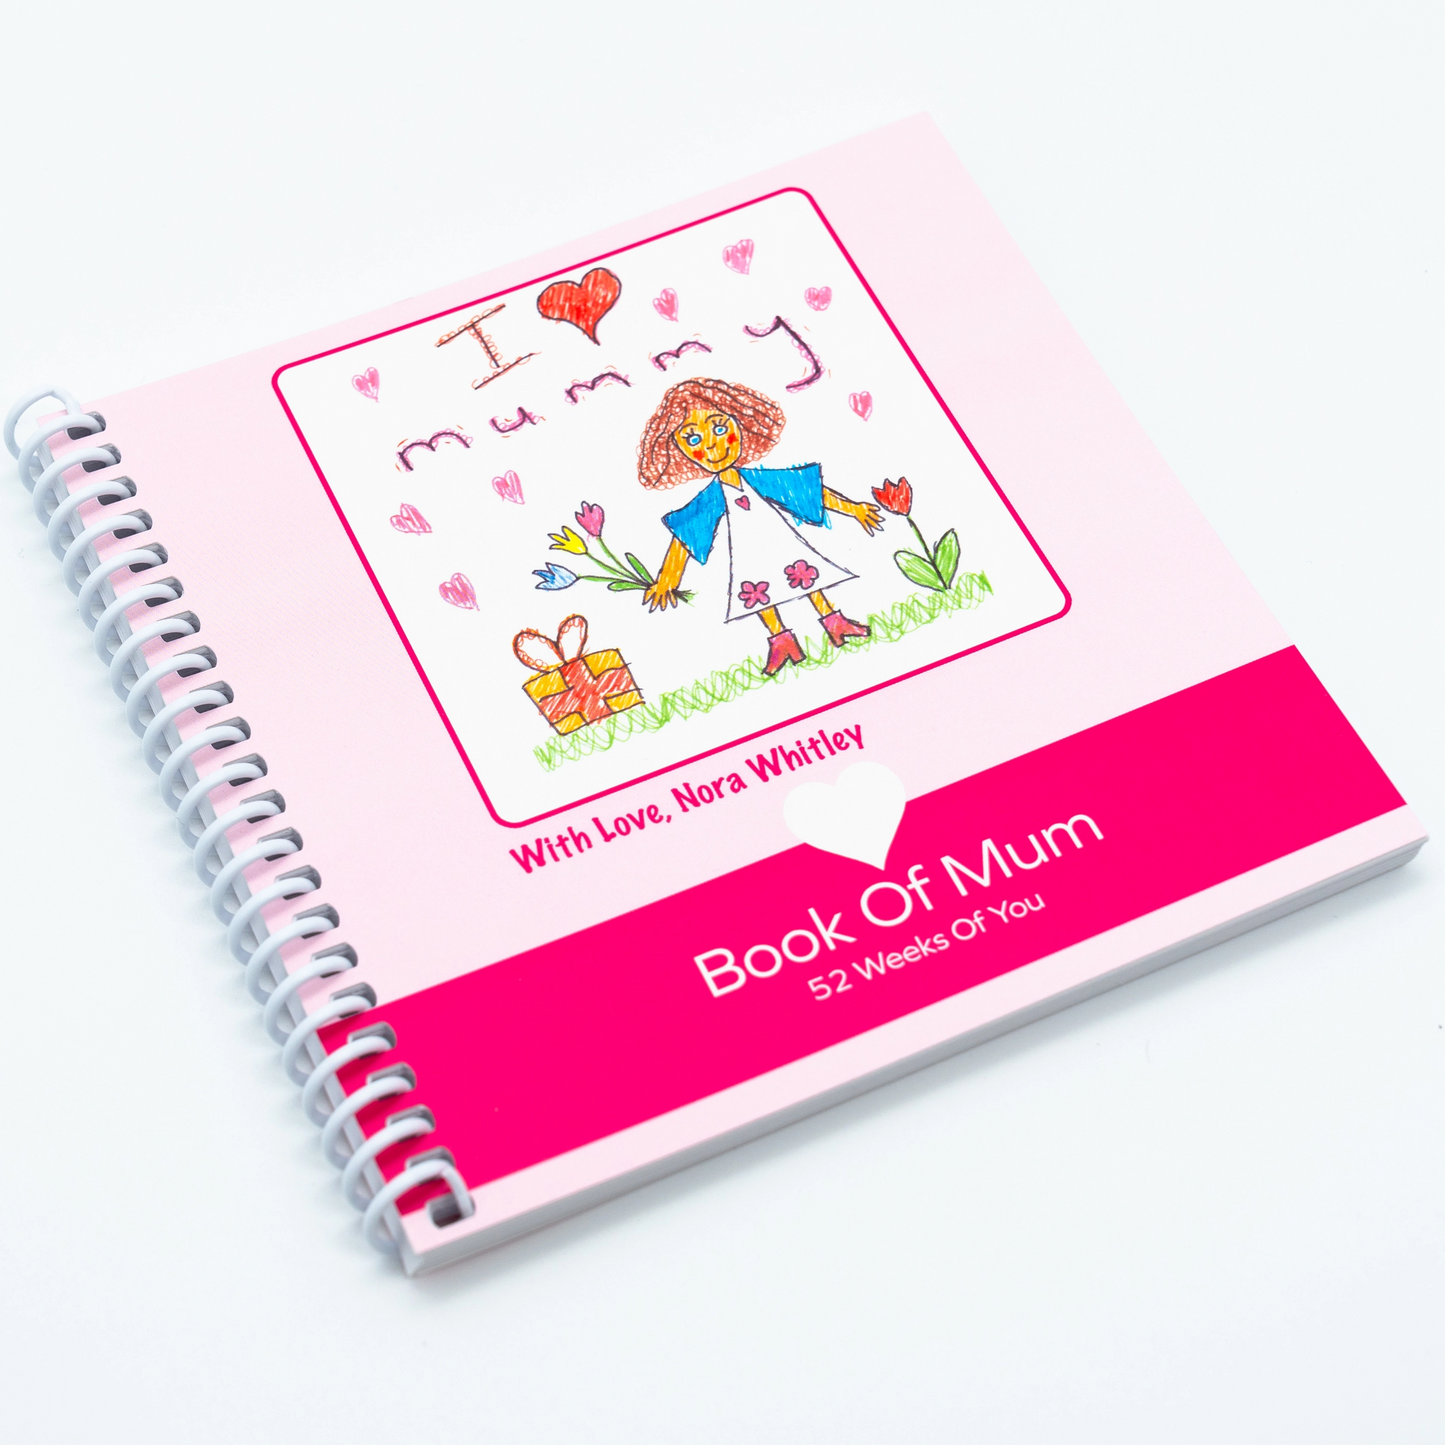 Book of Mum - 52 Questions About Mum